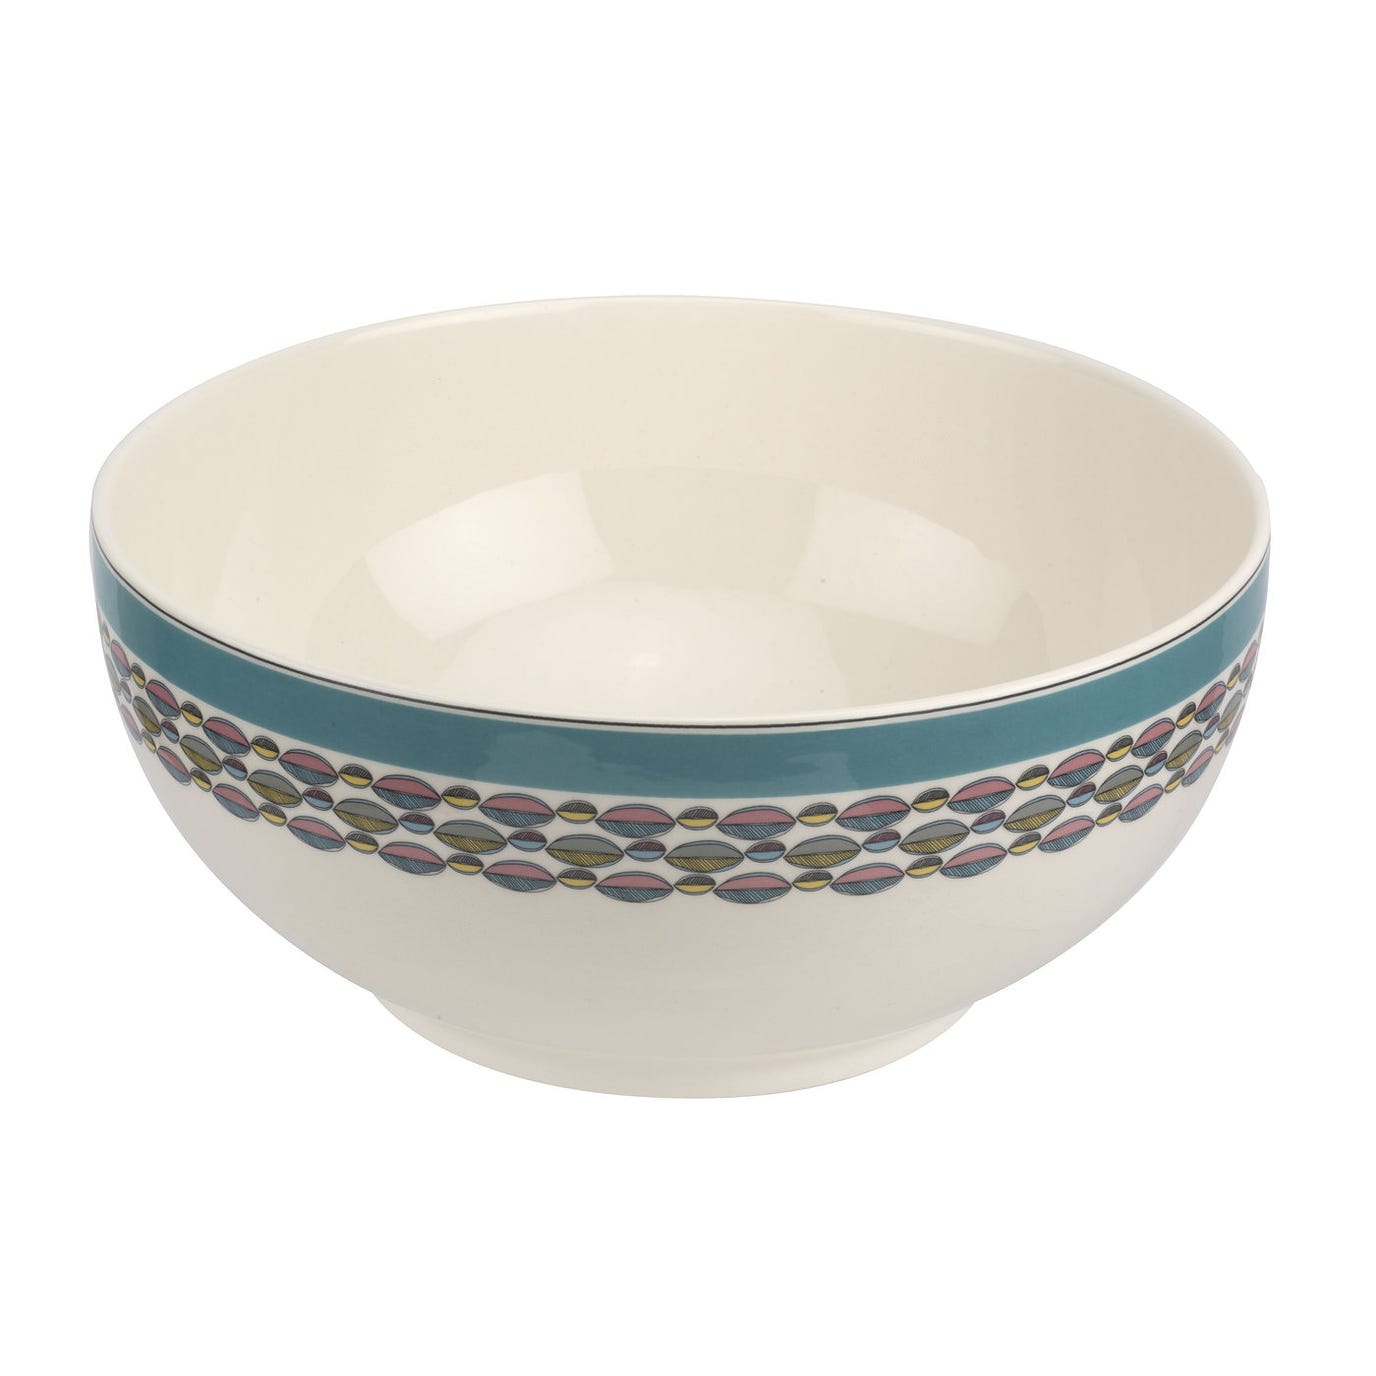 Portmeirion Westerly Turquoise 10.75 Inch Deep Bowl